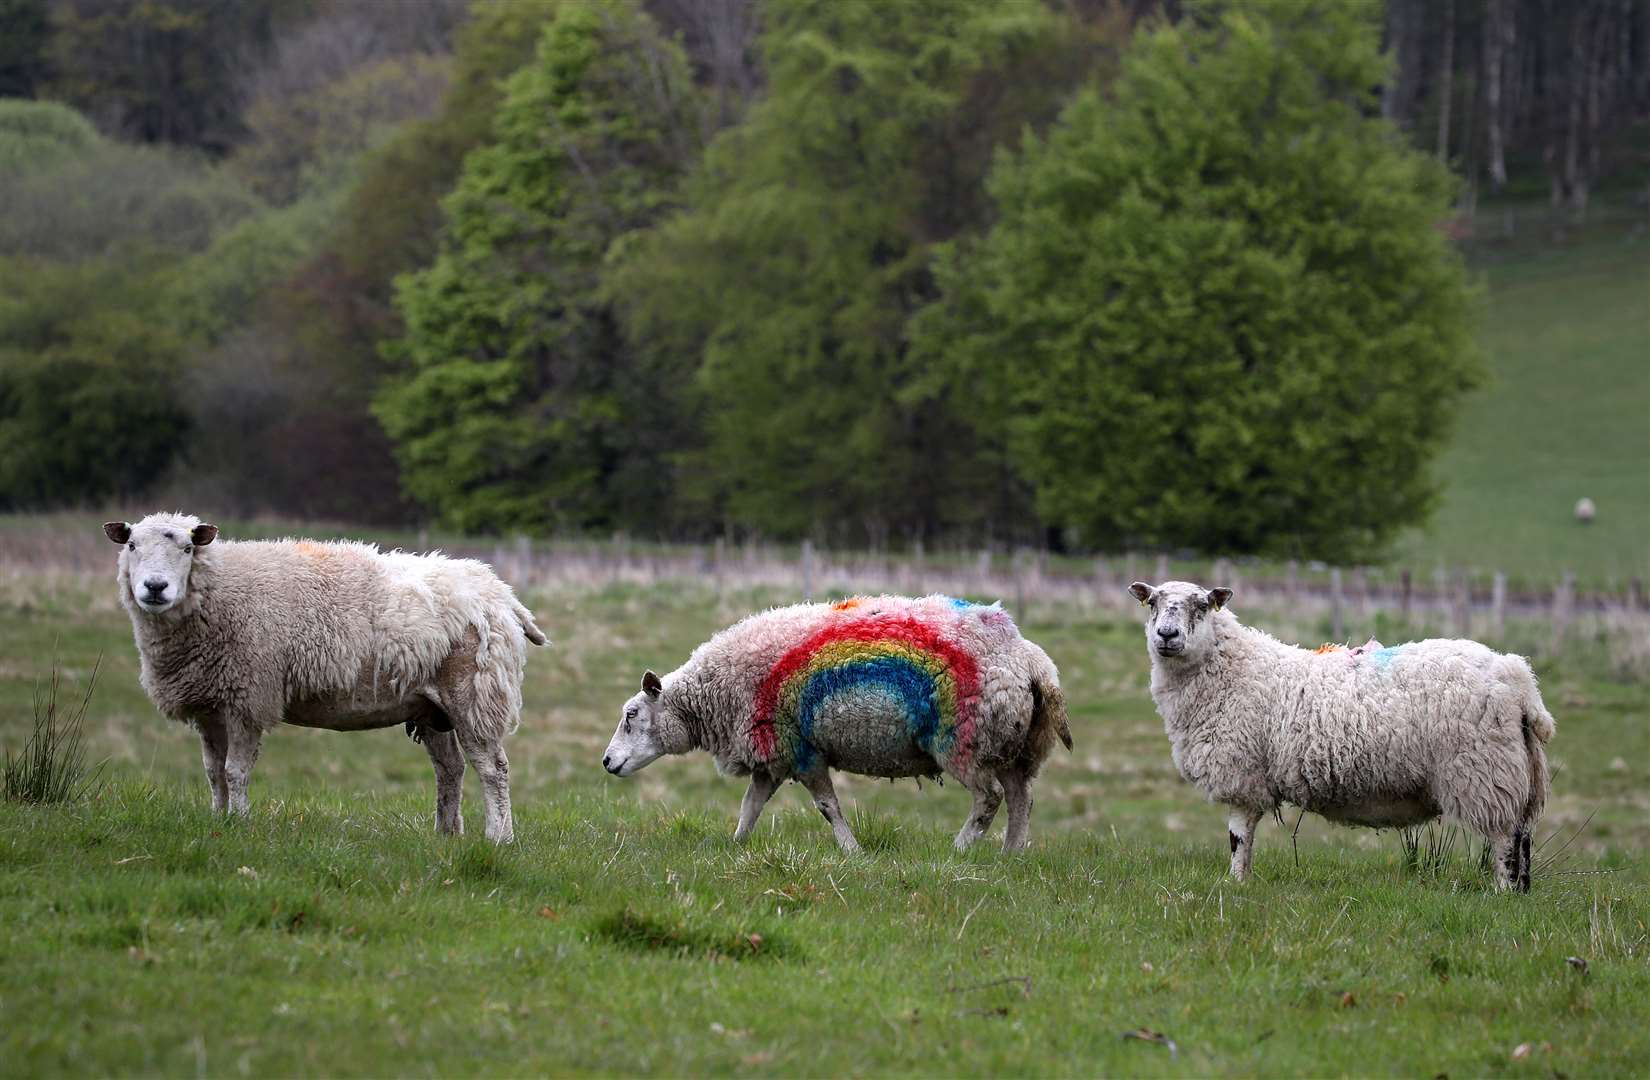 A sheep with a rainbow painted on its side in a field near Dunblane (Andrew Milligan/PA)